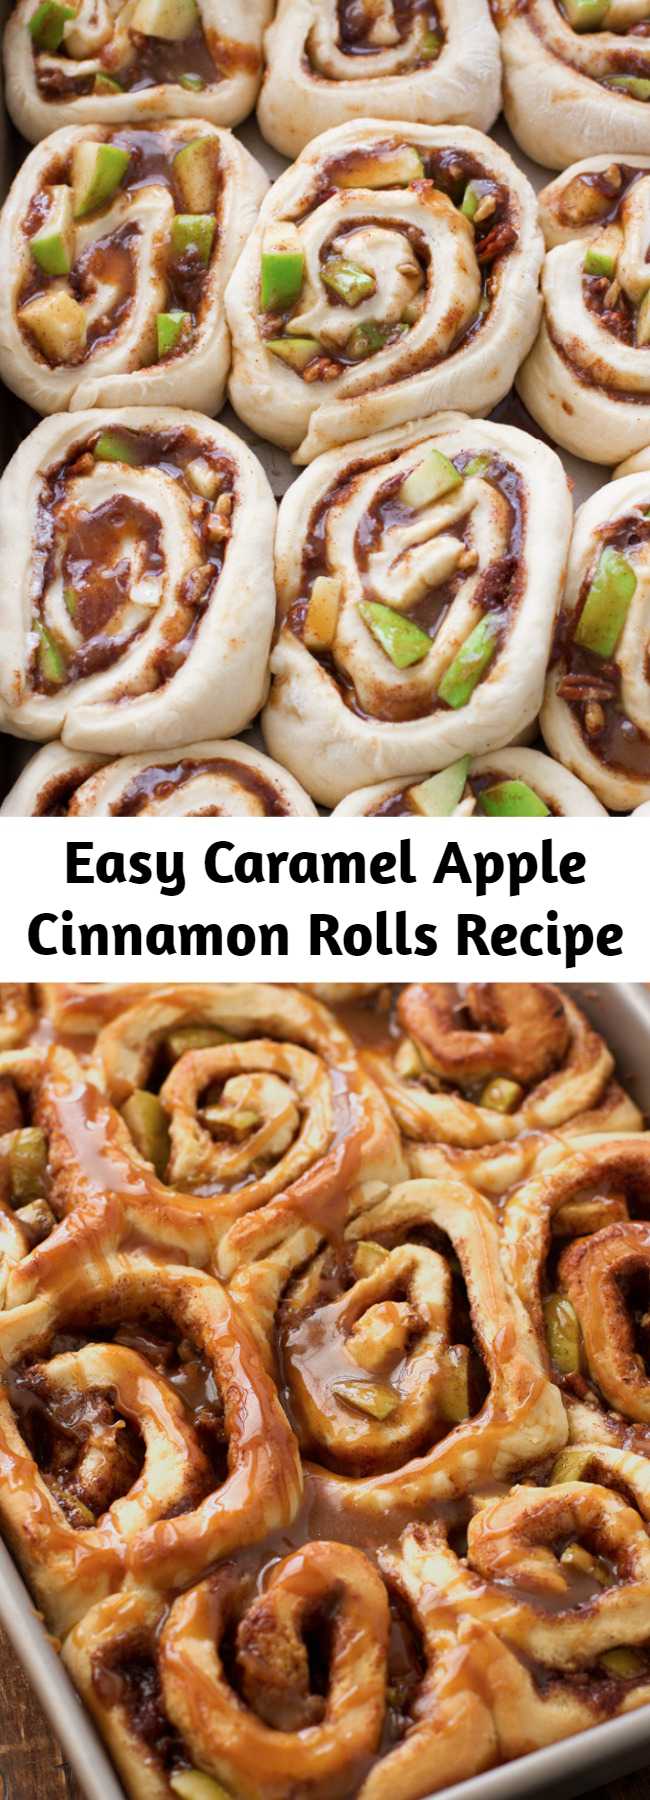 Easy Caramel Apple Cinnamon Rolls Recipe - Caramel apple cinnamon rolls stuffed with cinnamon, brown sugar, caramel, granny-smith apples and drizzled with apple cider caramel sauce and pecans. My cinnamon rolls have the most wonderful, bakery-style buttery flavor! These apple cinnamon rolls are the perfect fall treat!